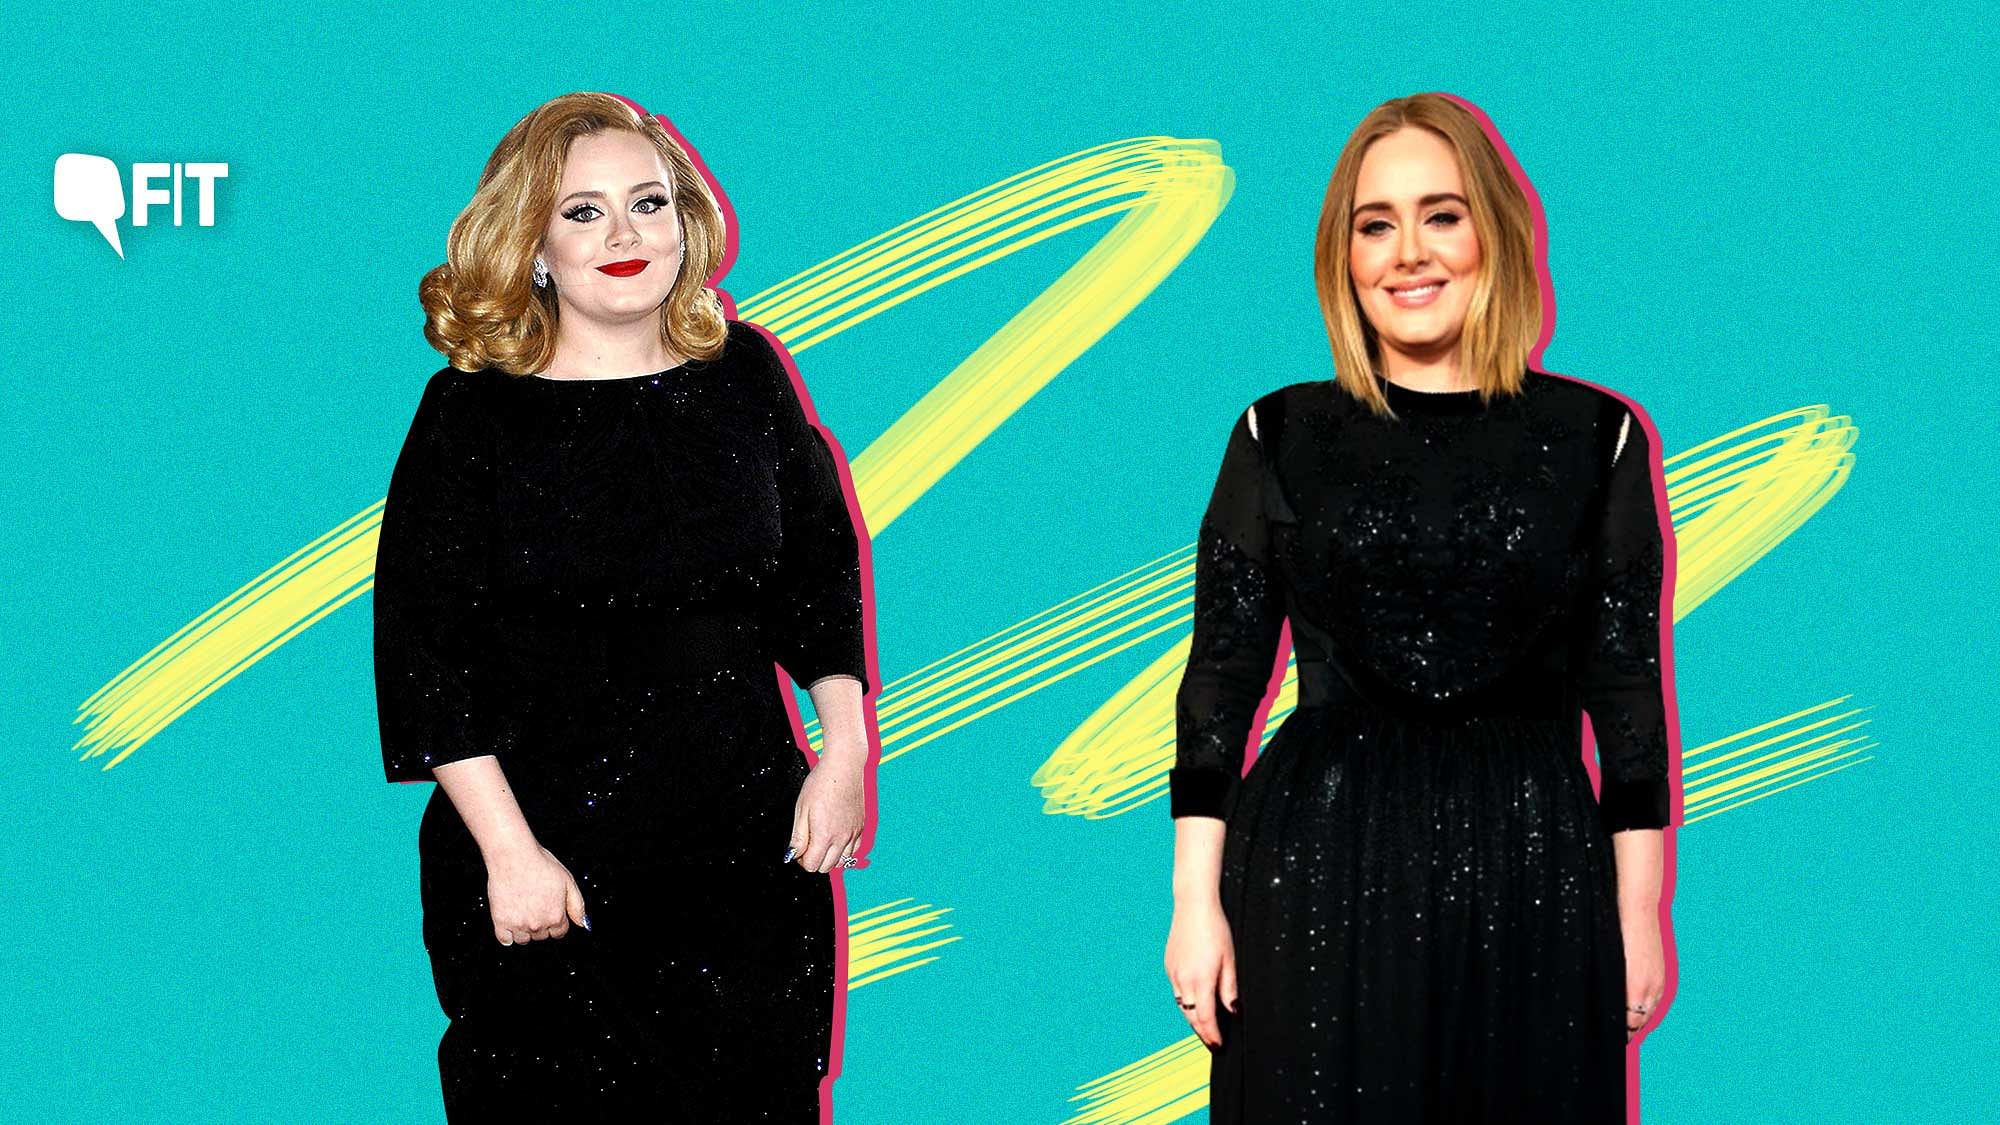 Adele’s almost 50-pound weight loss can reportedly be credited to the ‘sirtfood diet’.